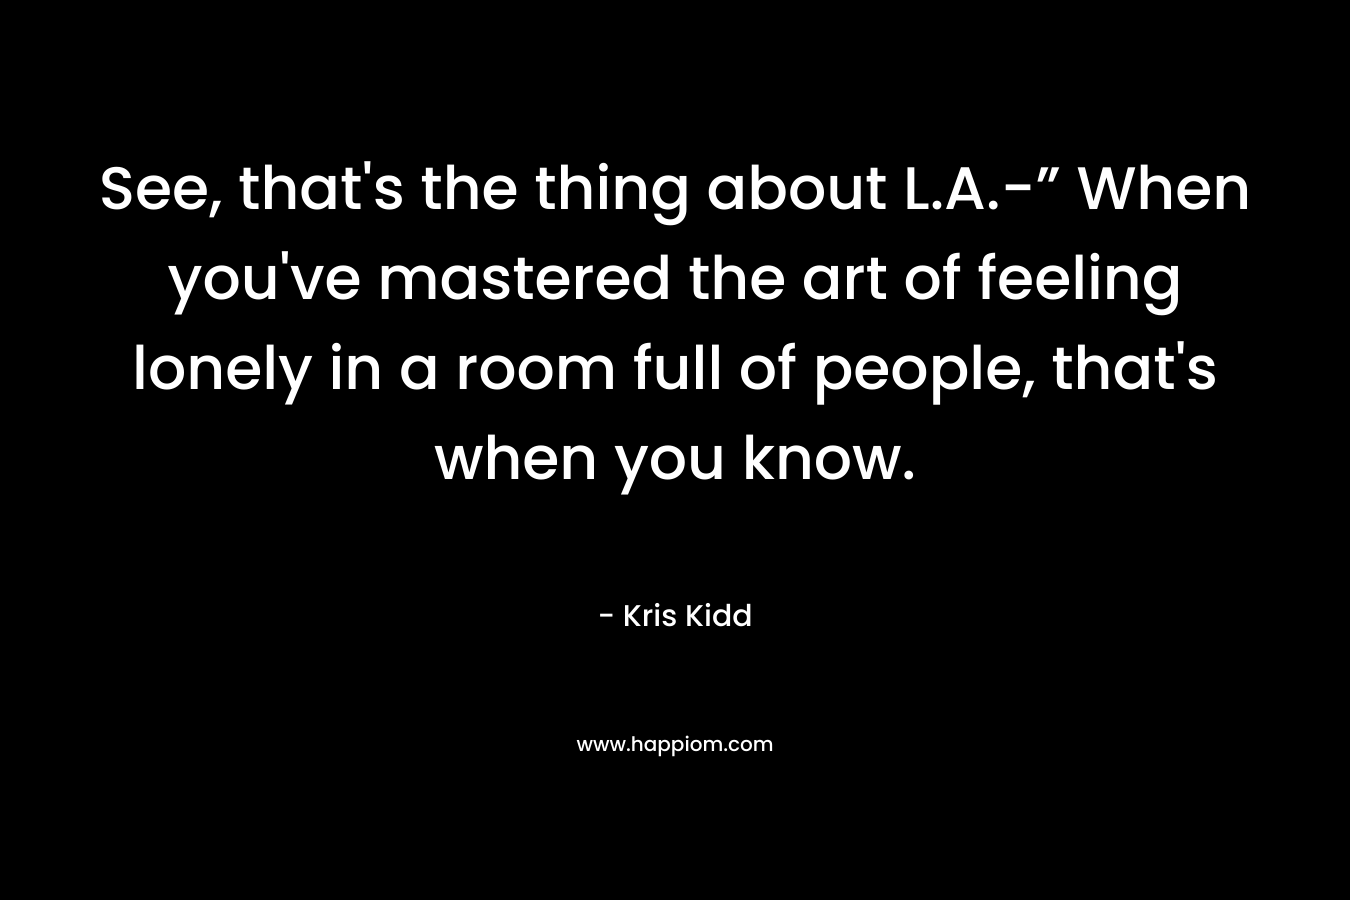 See, that's the thing about L.A.-” When you've mastered the art of feeling lonely in a room full of people, that's when you know.